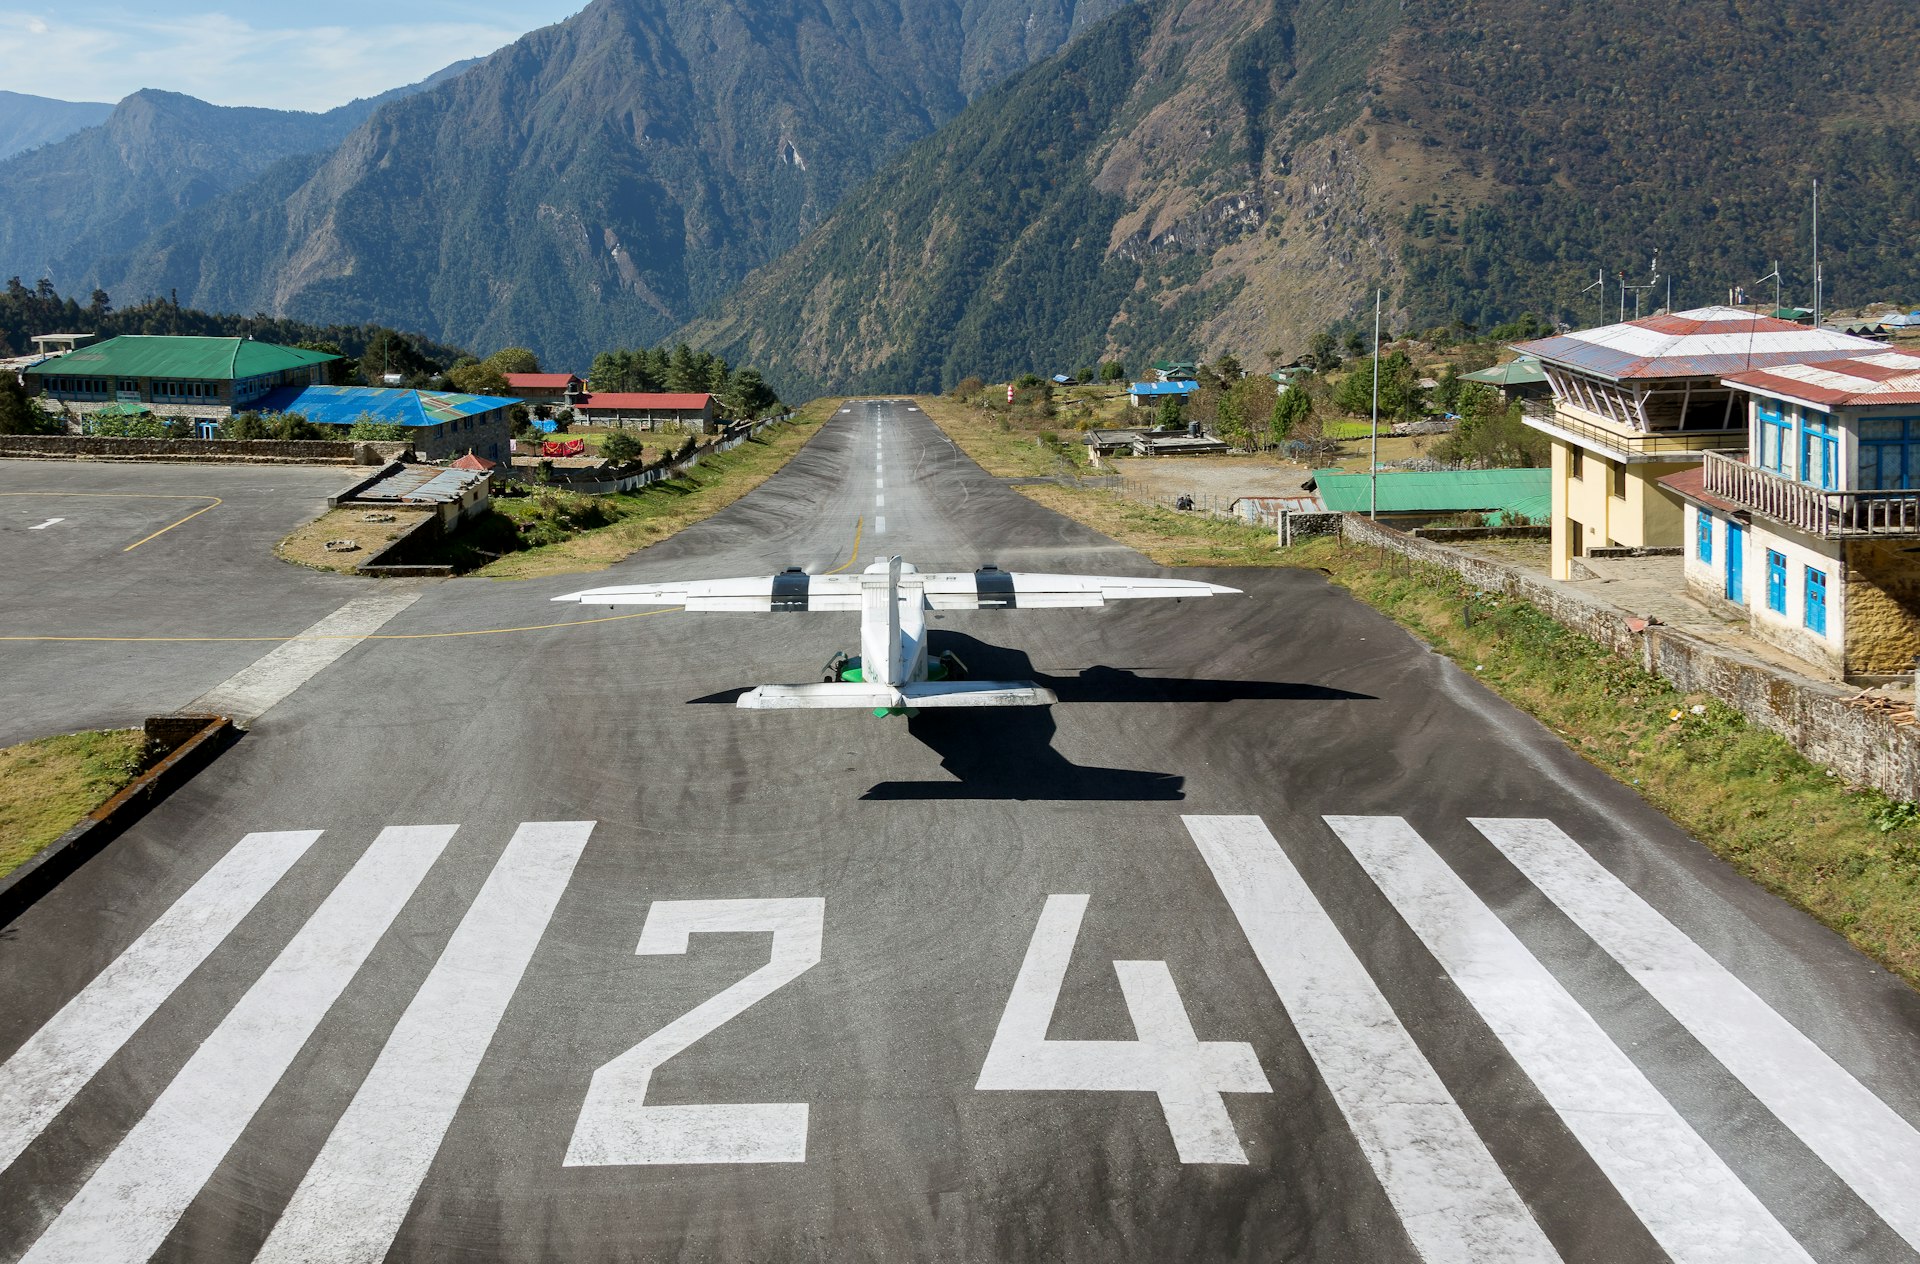 An aircraft on the runway of the Tenzing-Hillary airport in Lukla, Nepal